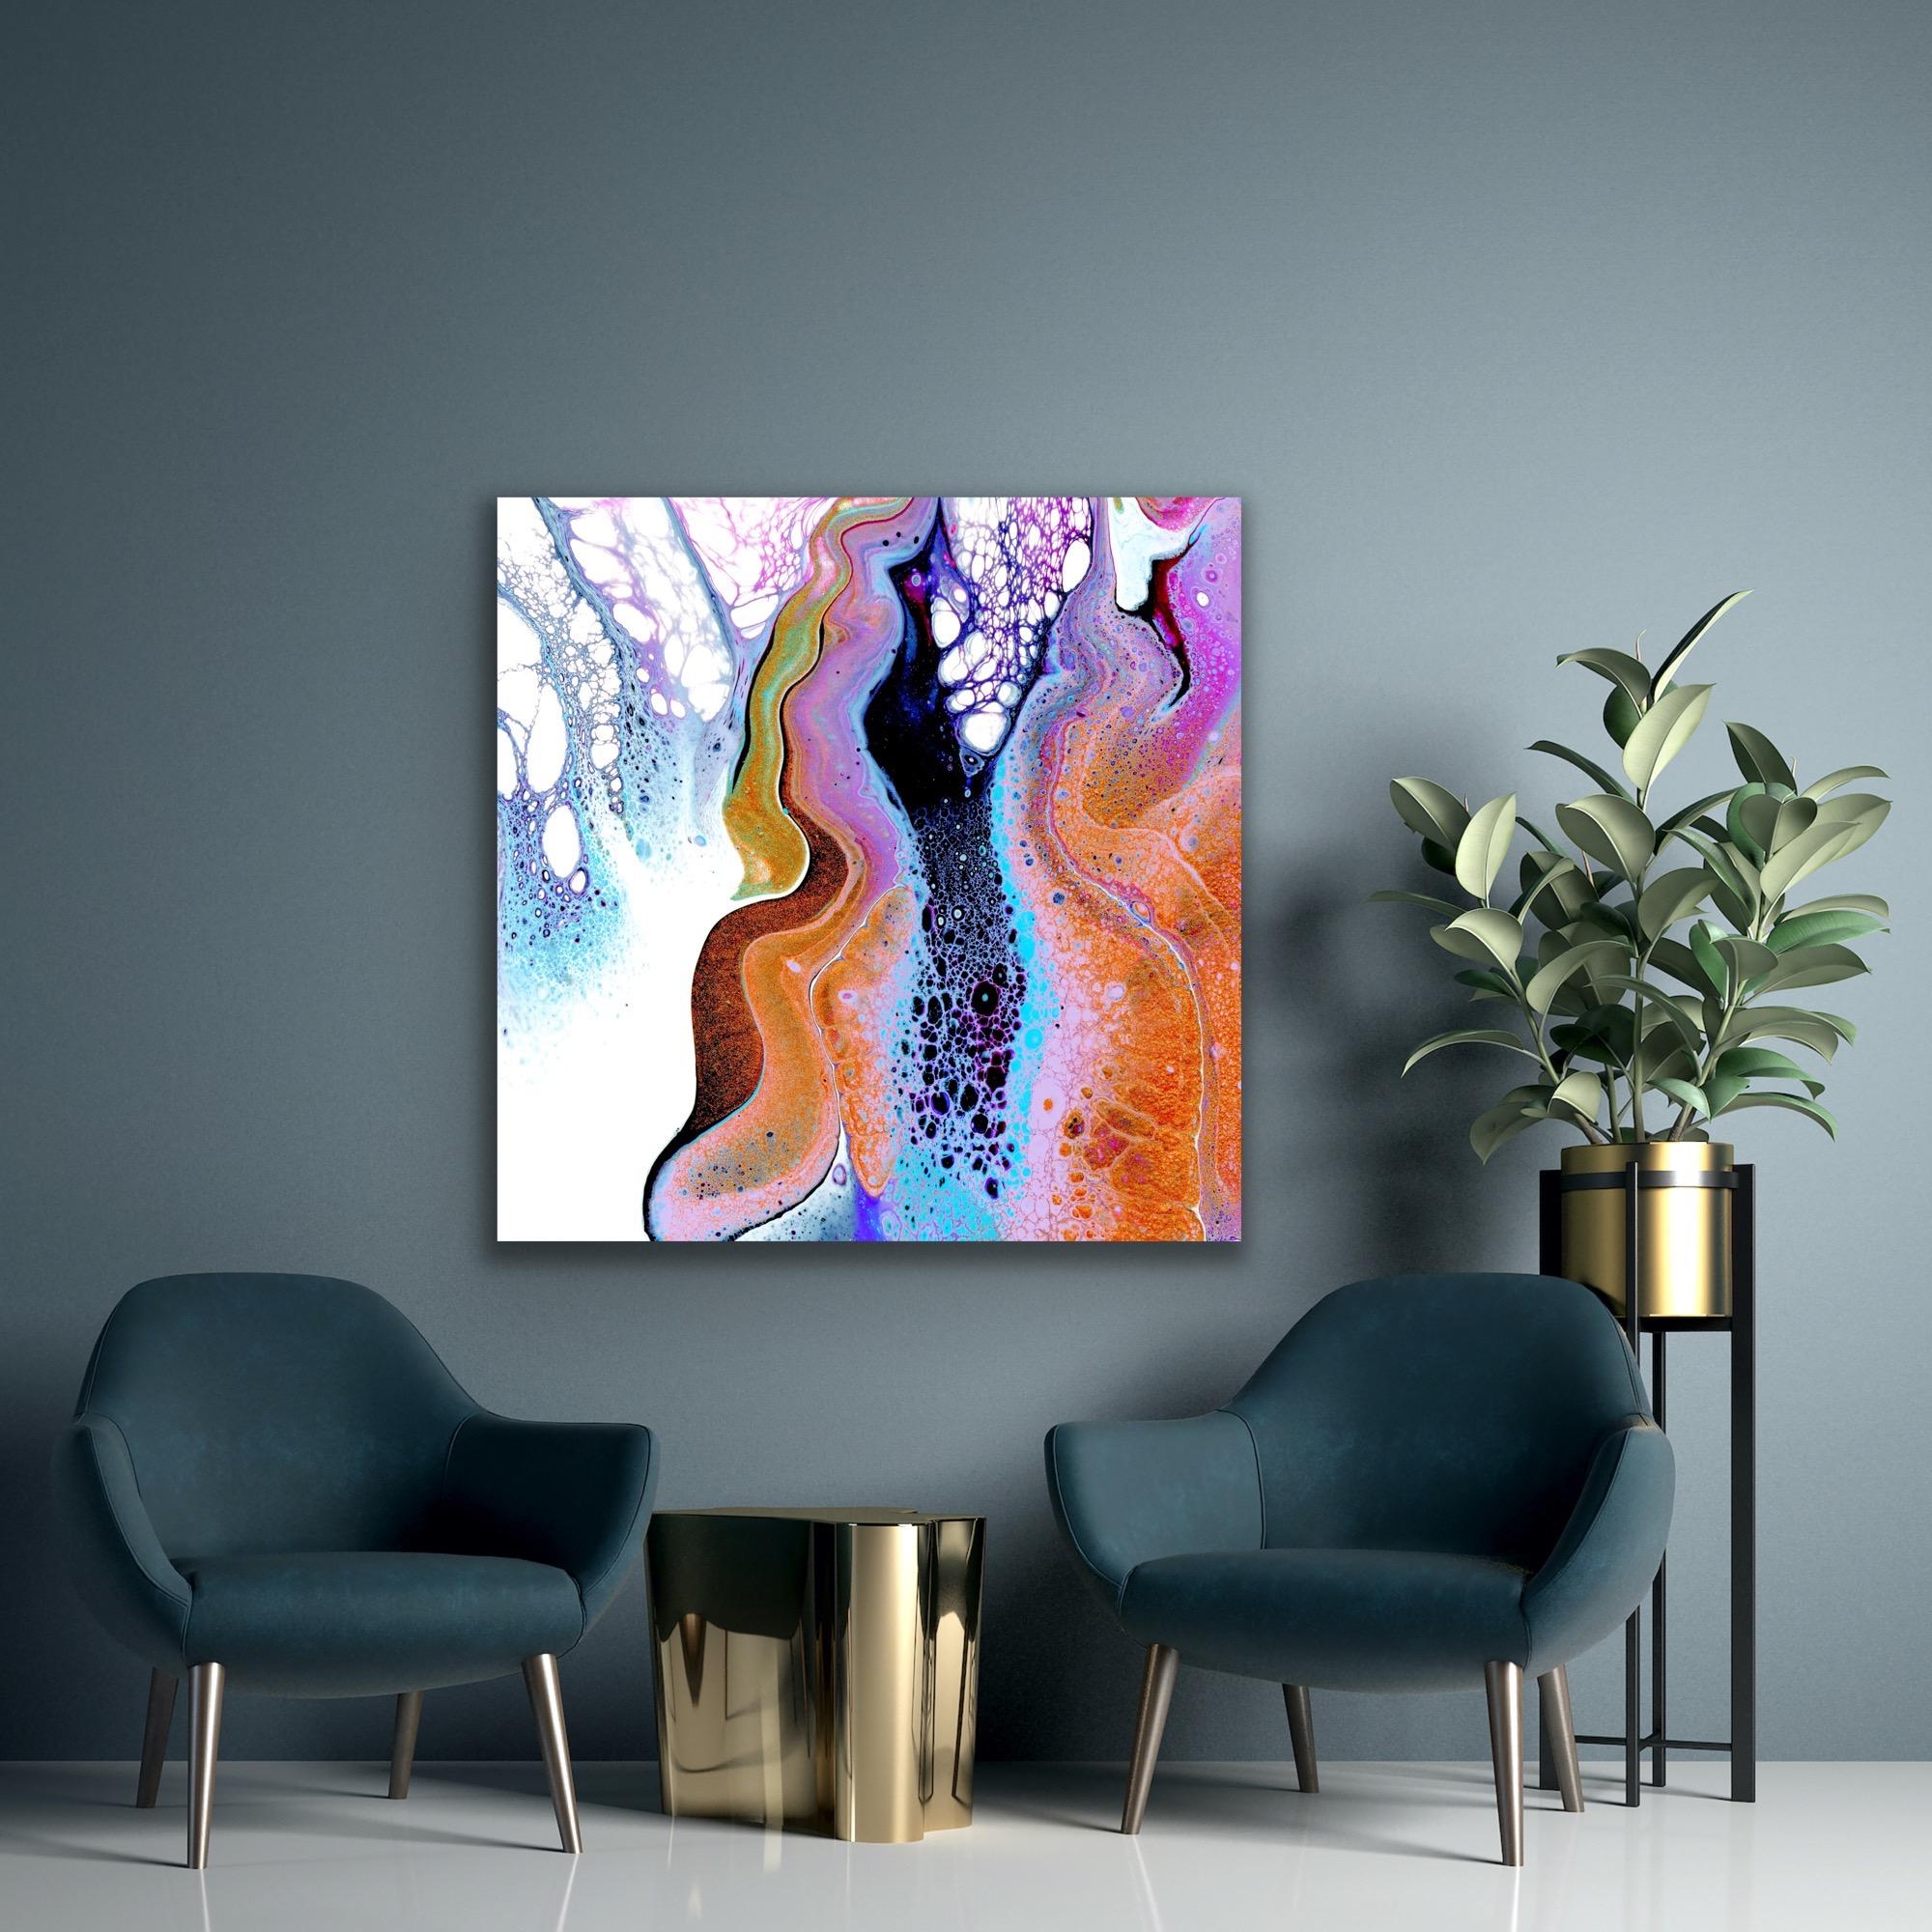 This modern abstract painting is printed on a lightweight metal composite and is suitable for indoor or outdoor decor. This open edition print of Celeste Reiter's original painting, is signed by the artist. 

-Title: Aeration 
-Artist: Celeste